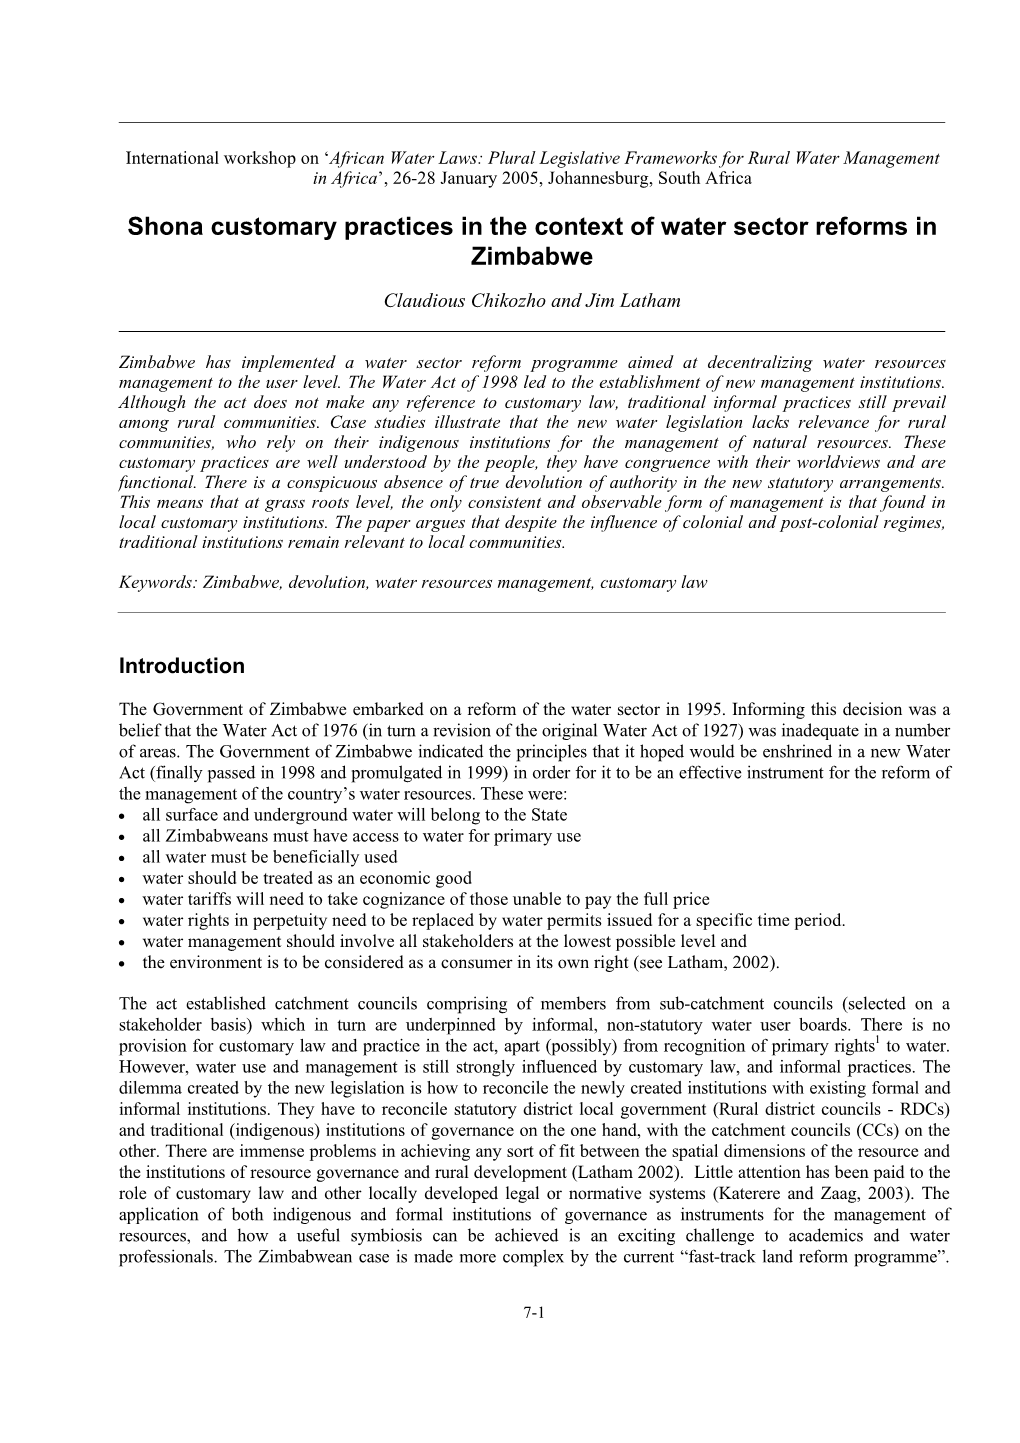 Shona Customary Practices in the Context of Water Sector Reforms in Zimbabwe